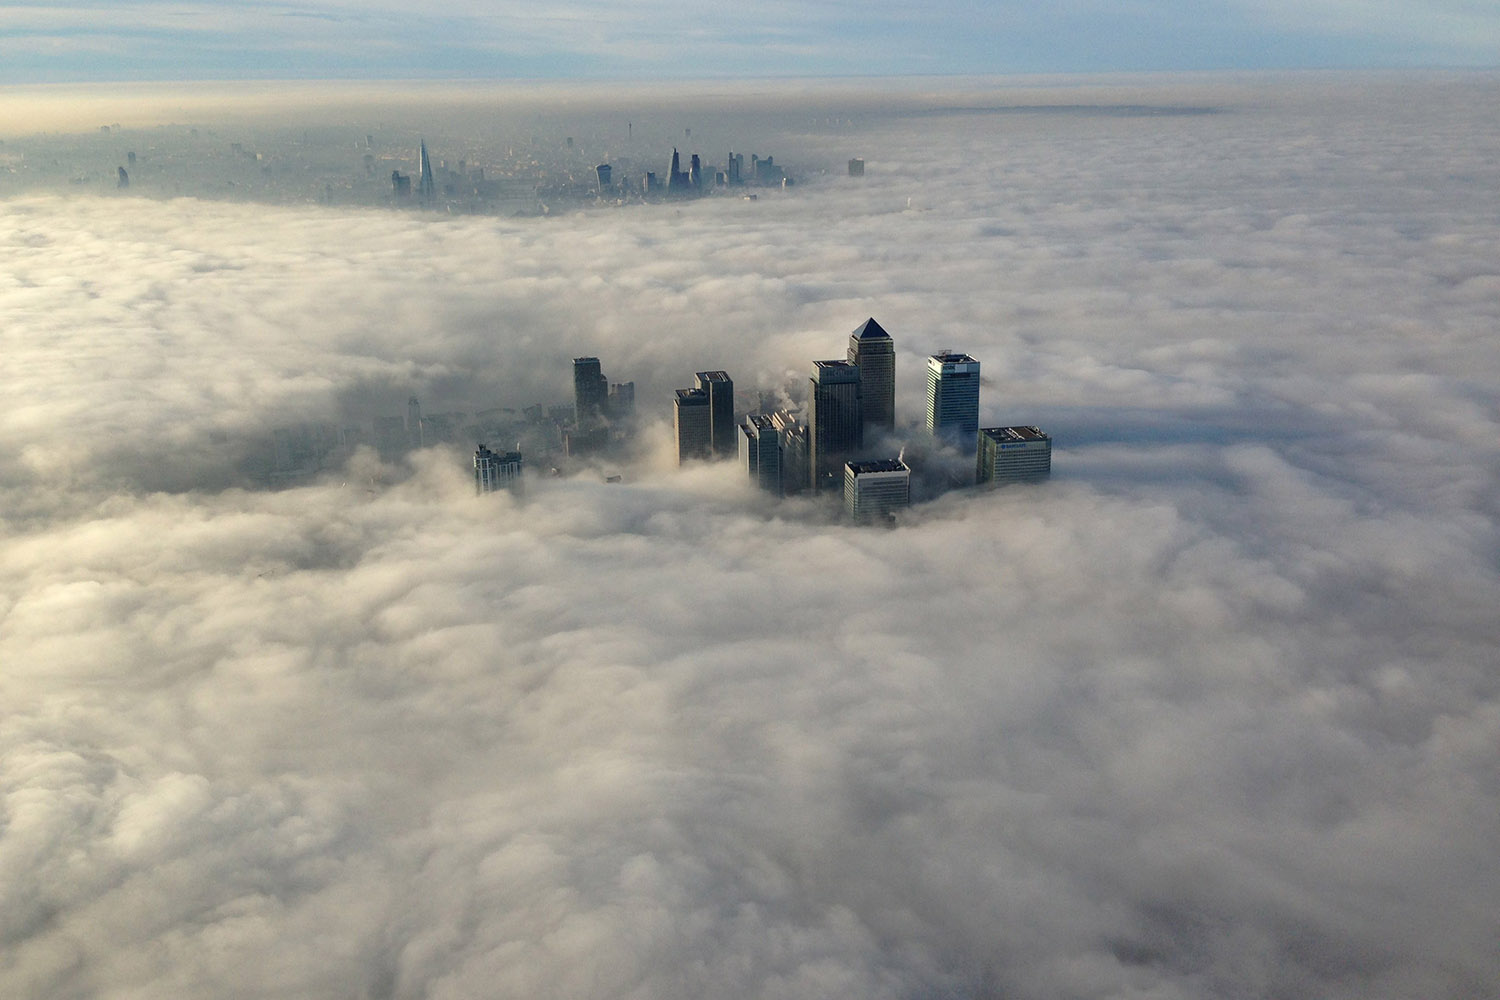 The Canary Wharf business district of east London taken from the Metropolitan Police helicopter is seen during a foggy morning in this photograph received via the Metropolitan Police in London